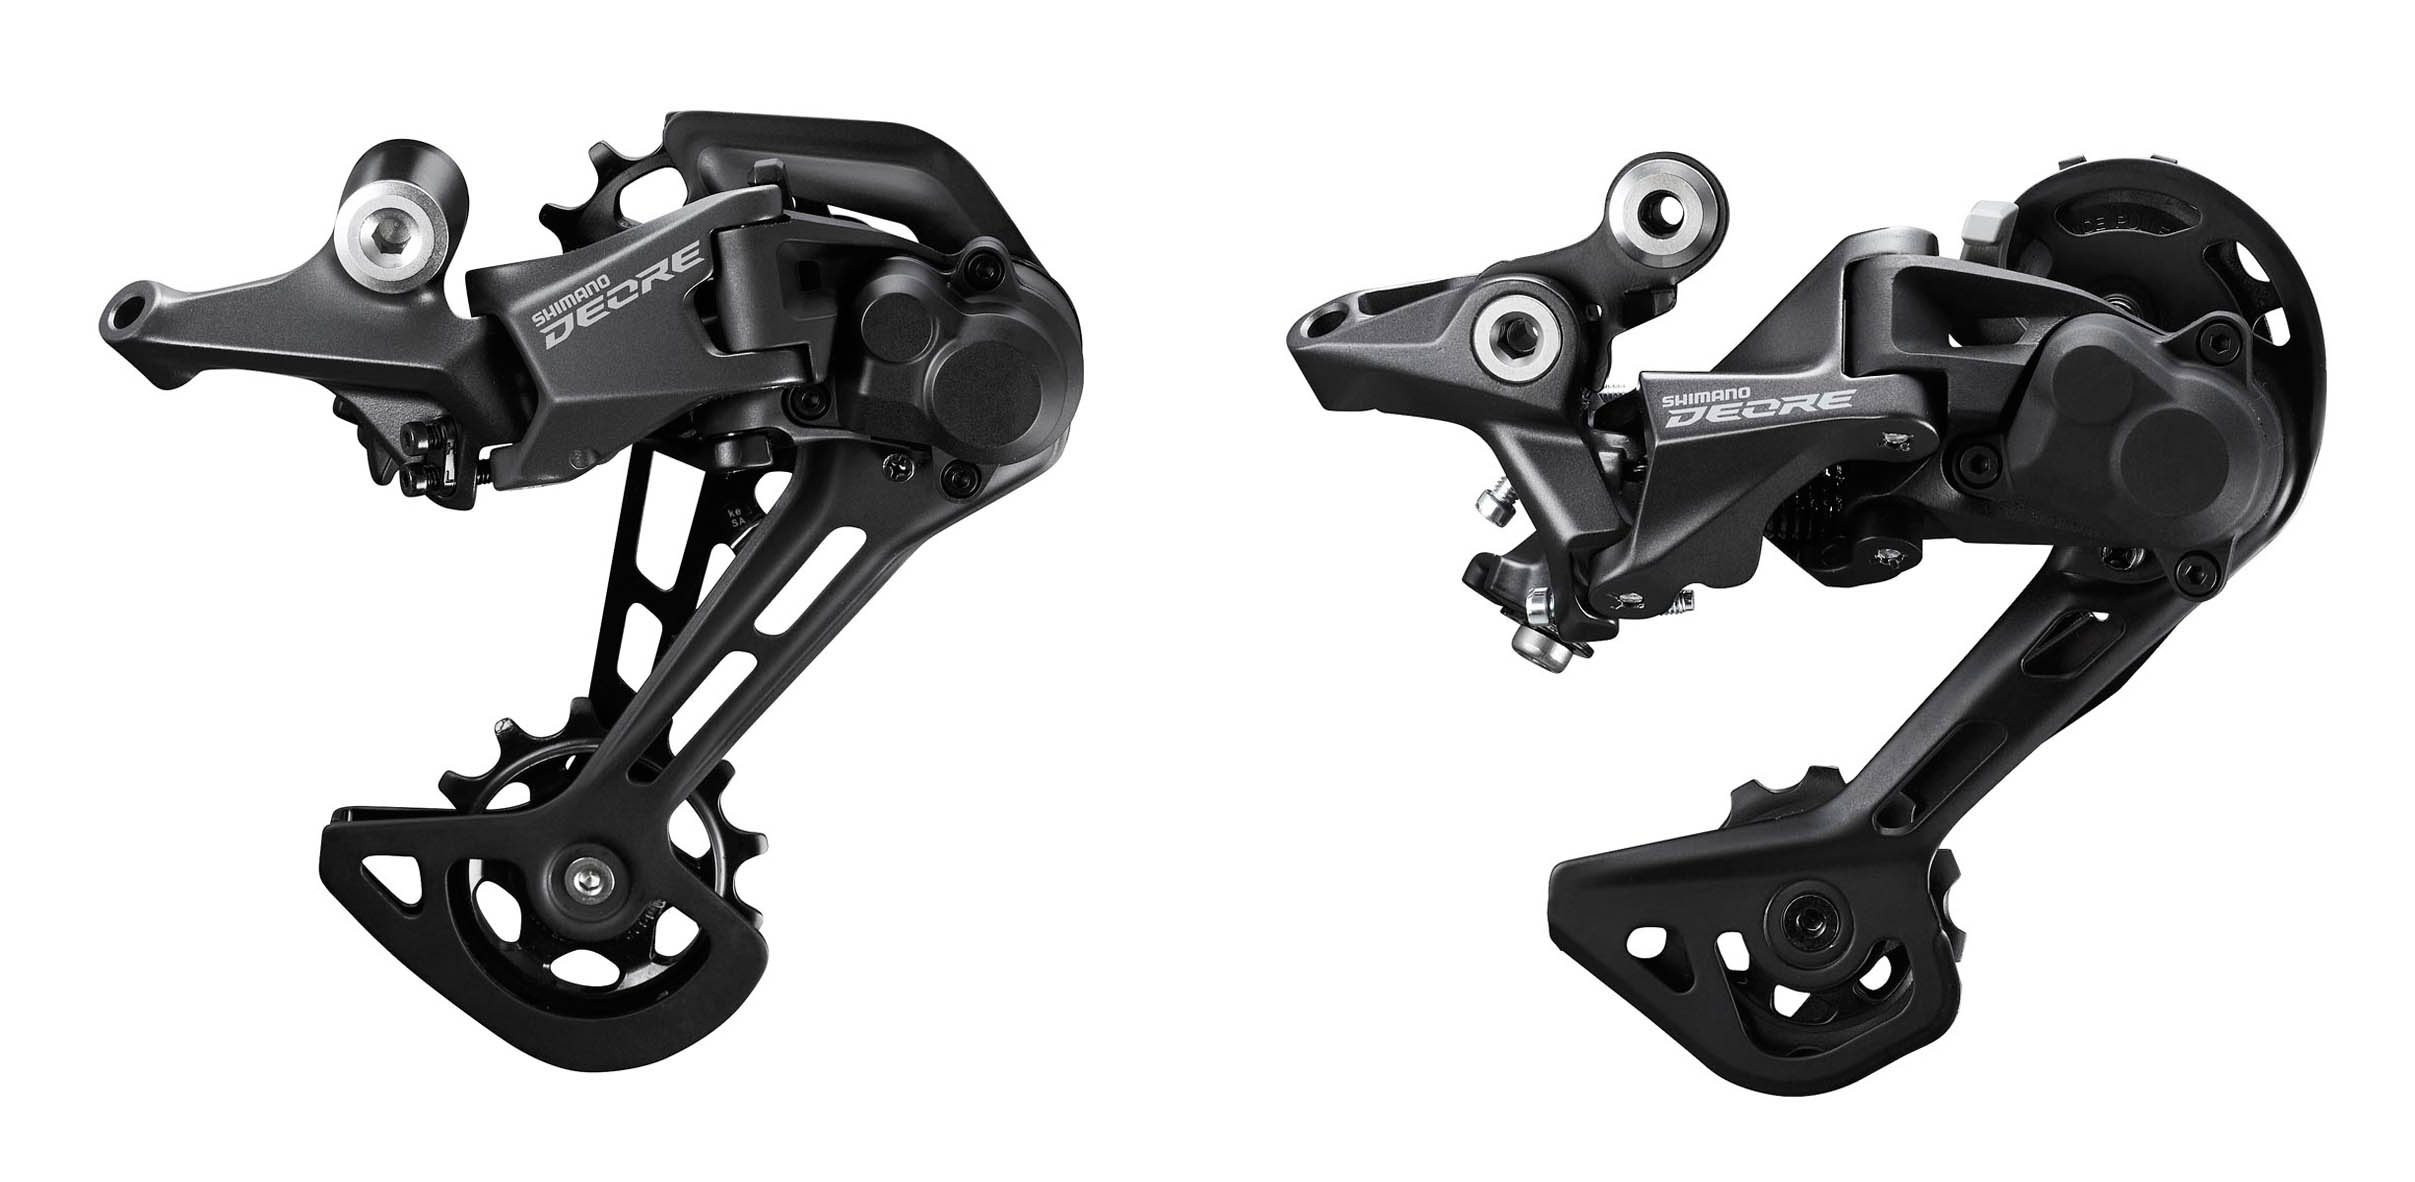 1x or 2x, Shimano Deore also gains new wide range options in 10 & 11 speed groups